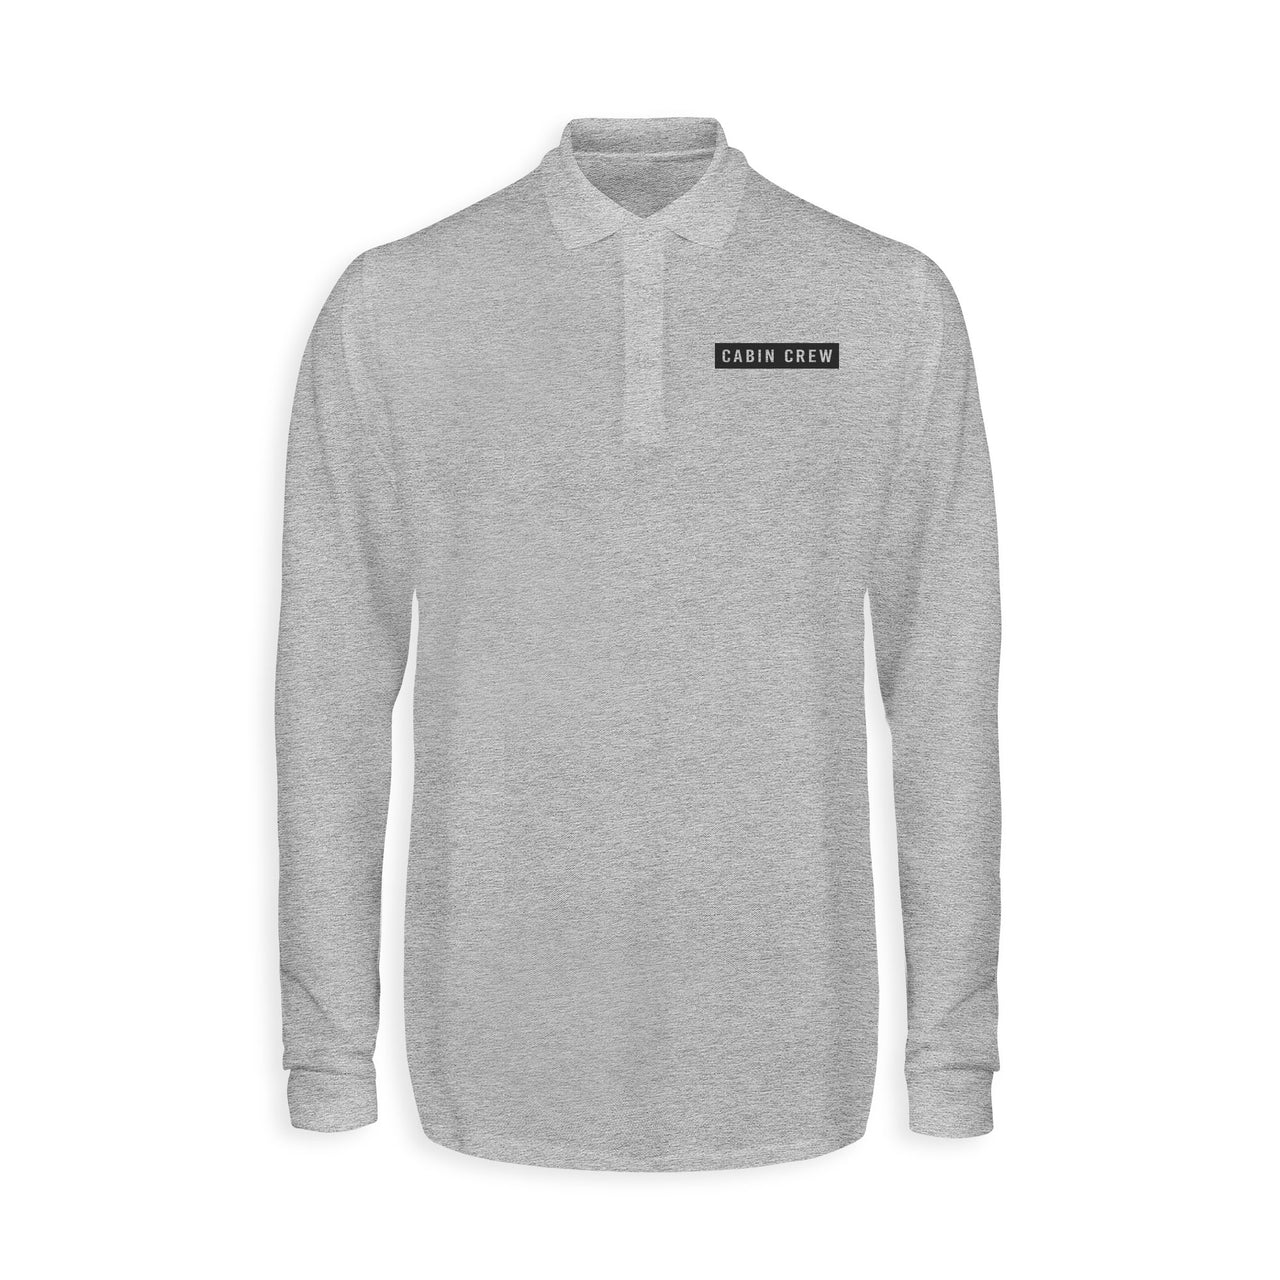 Cabin Crew Text Designed Long Sleeve Polo T-Shirts